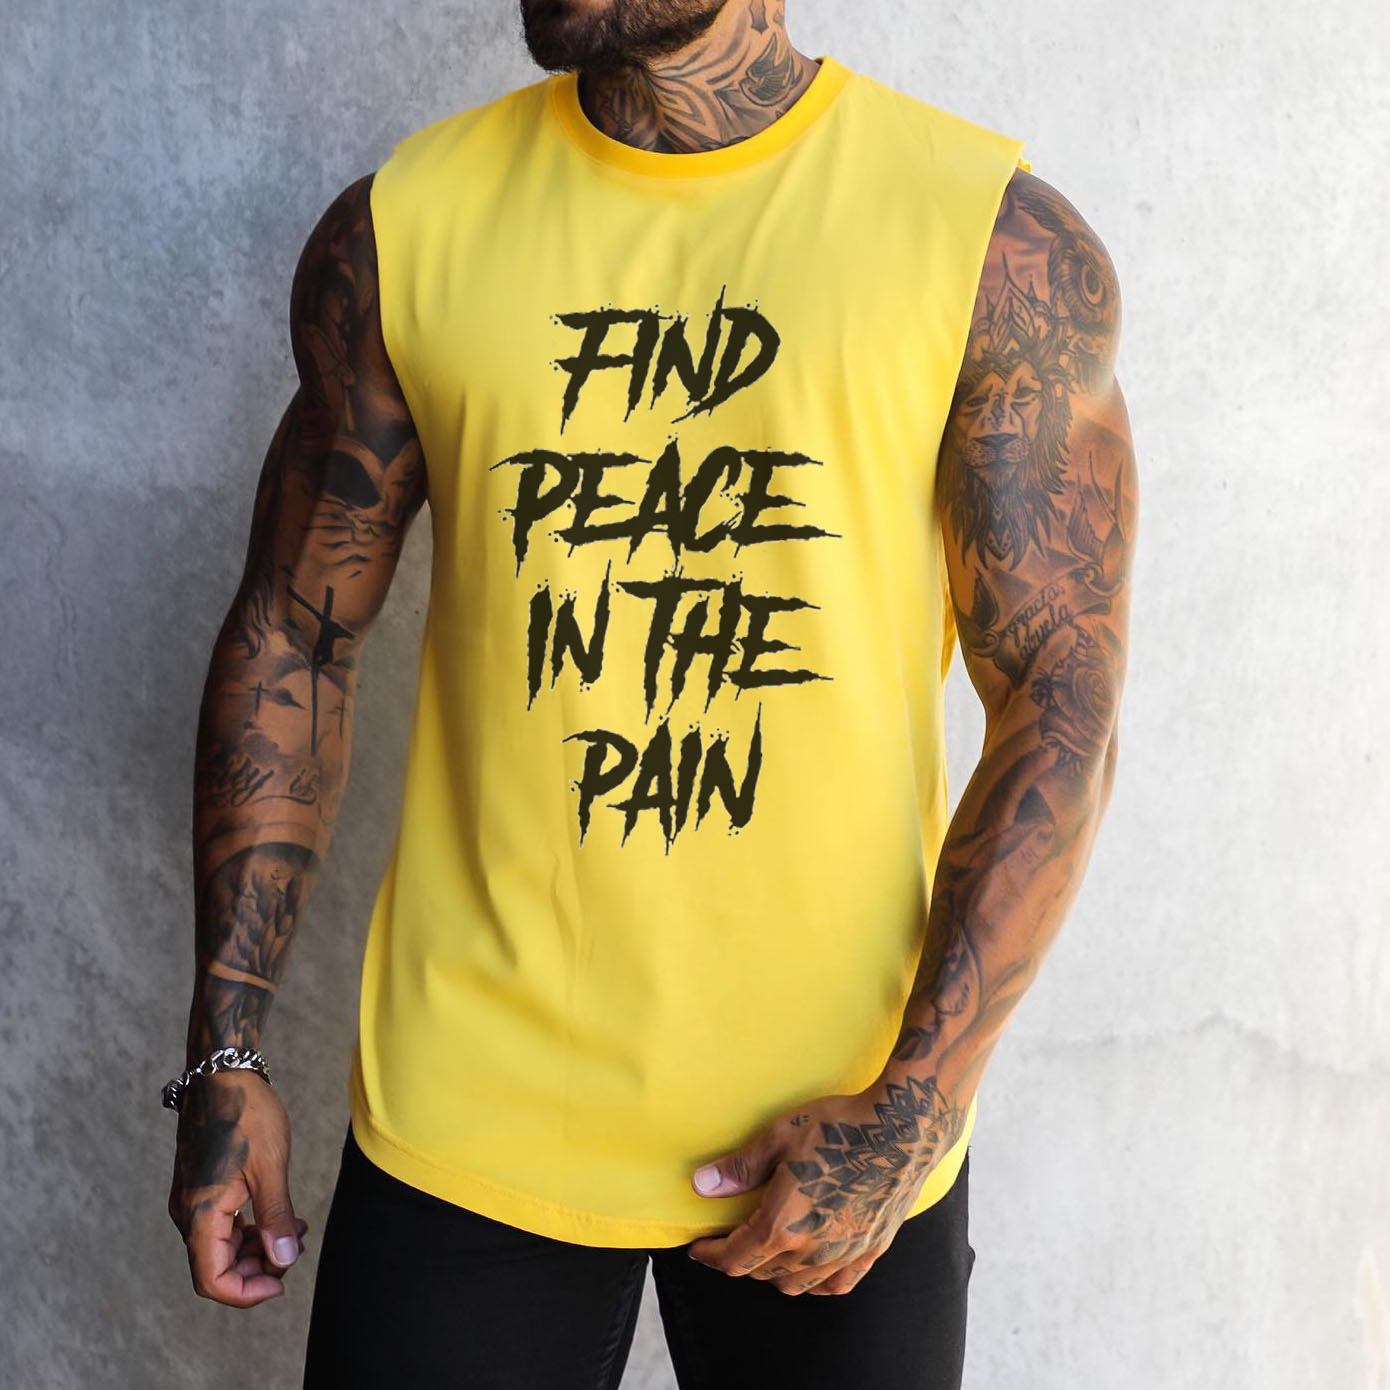 Find Peace In The Chic Pain Print Sleeveless T-shirt